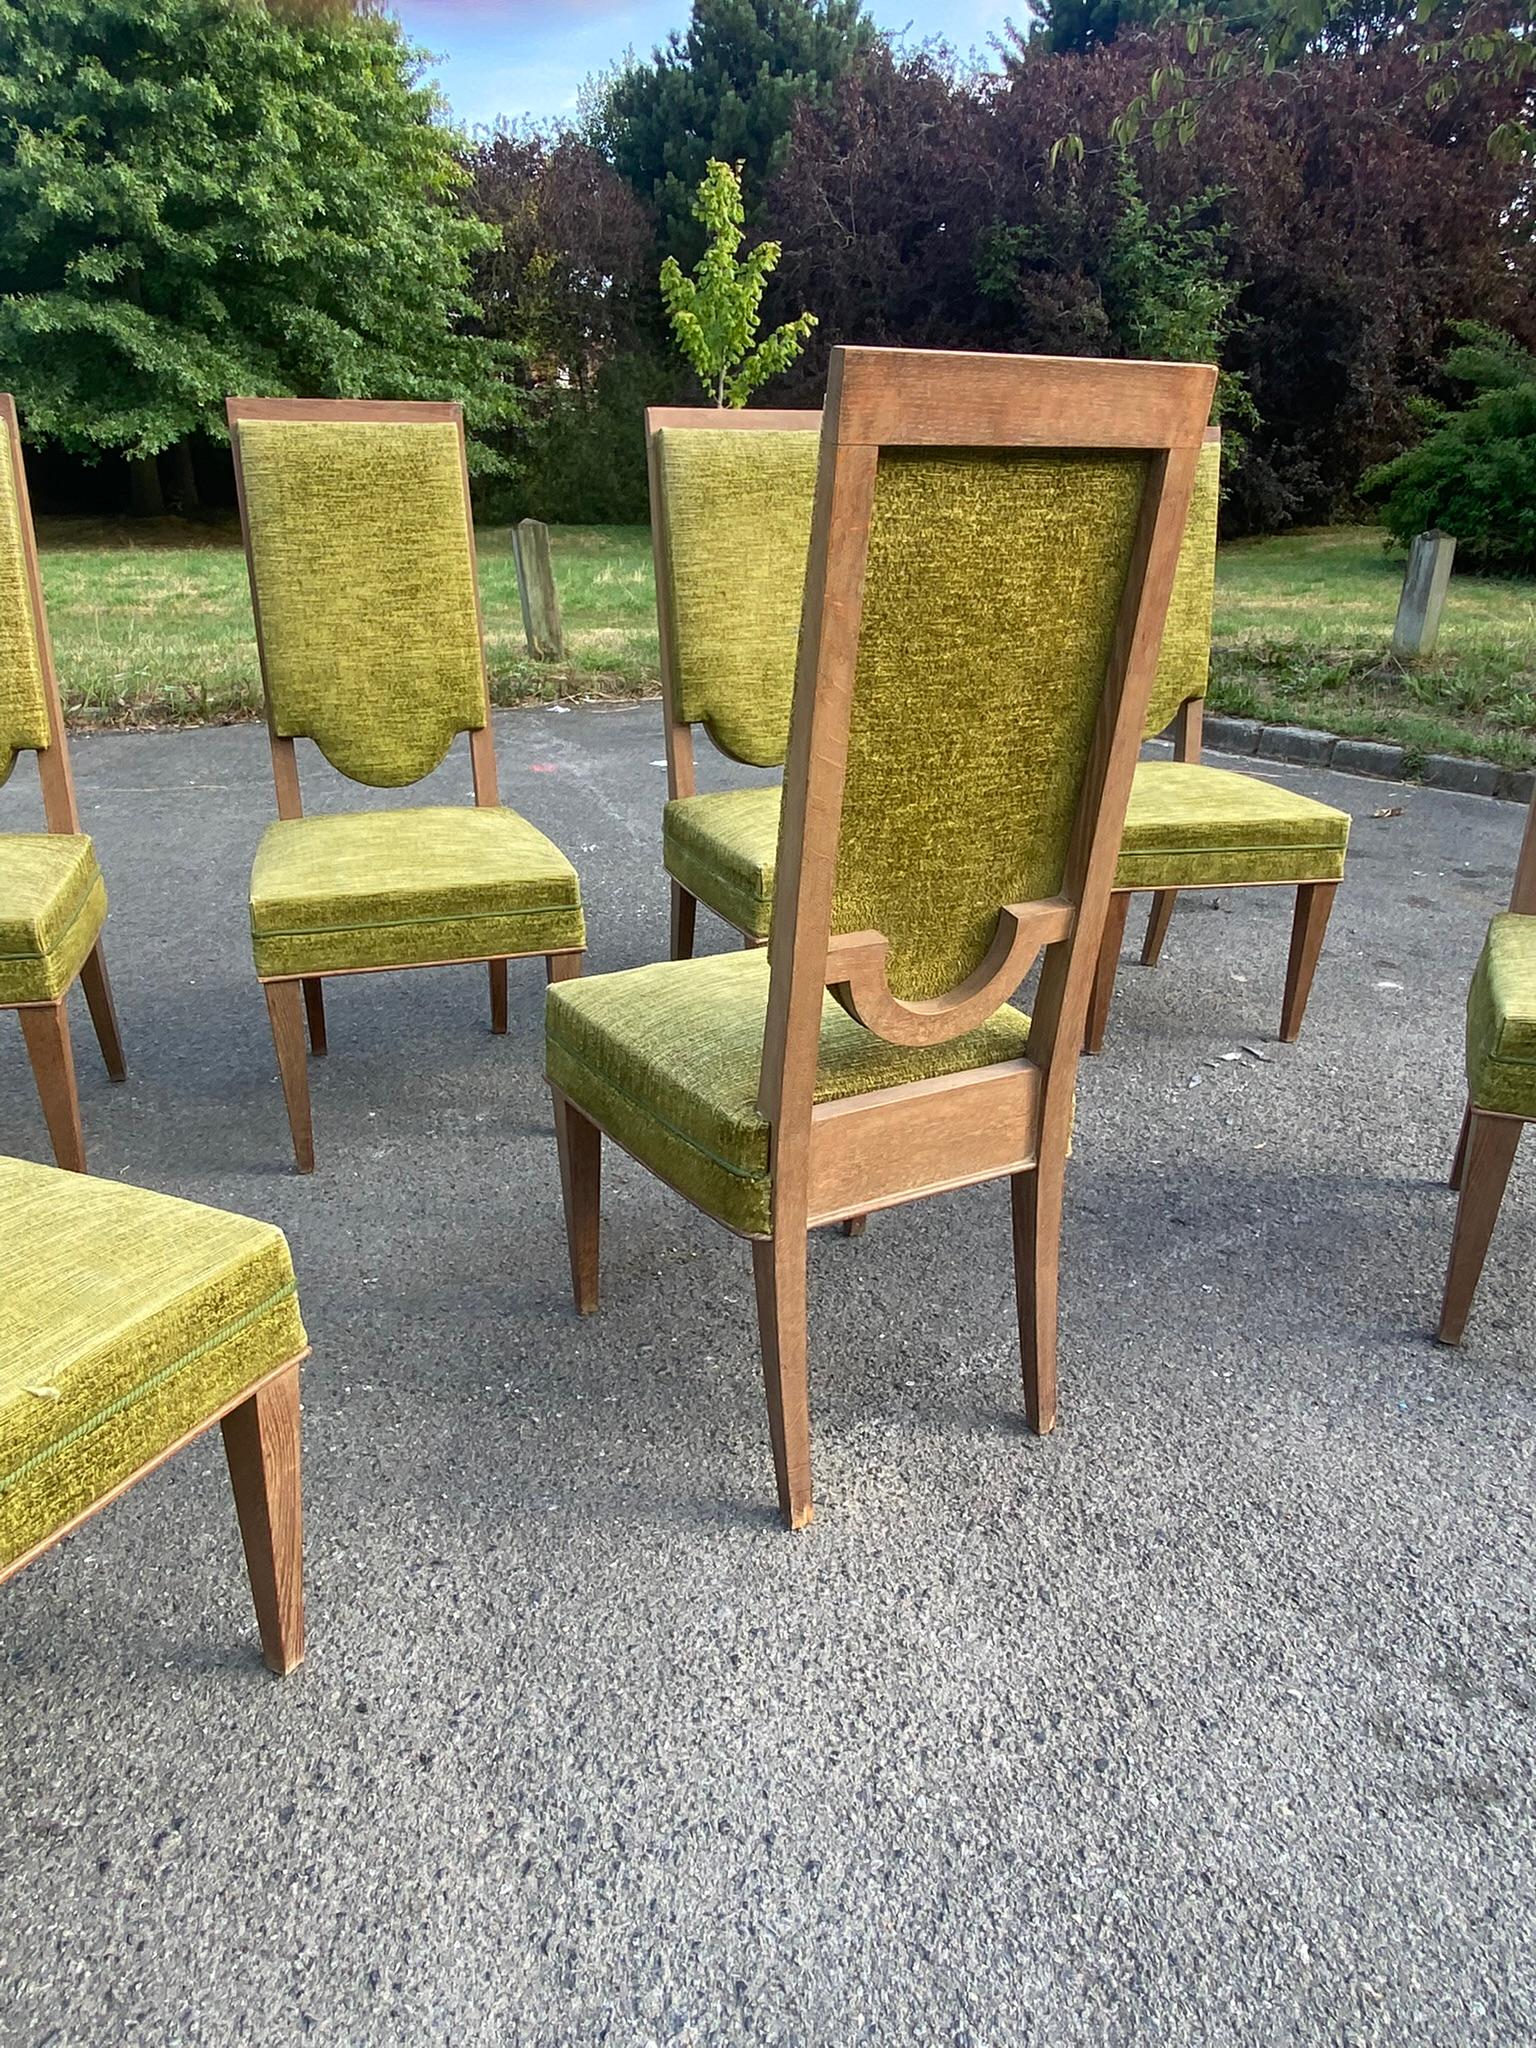 Maurice Jallot,  Set of Seven Art Deco Chairs in Oak, circa 1930/1940 For Sale 2